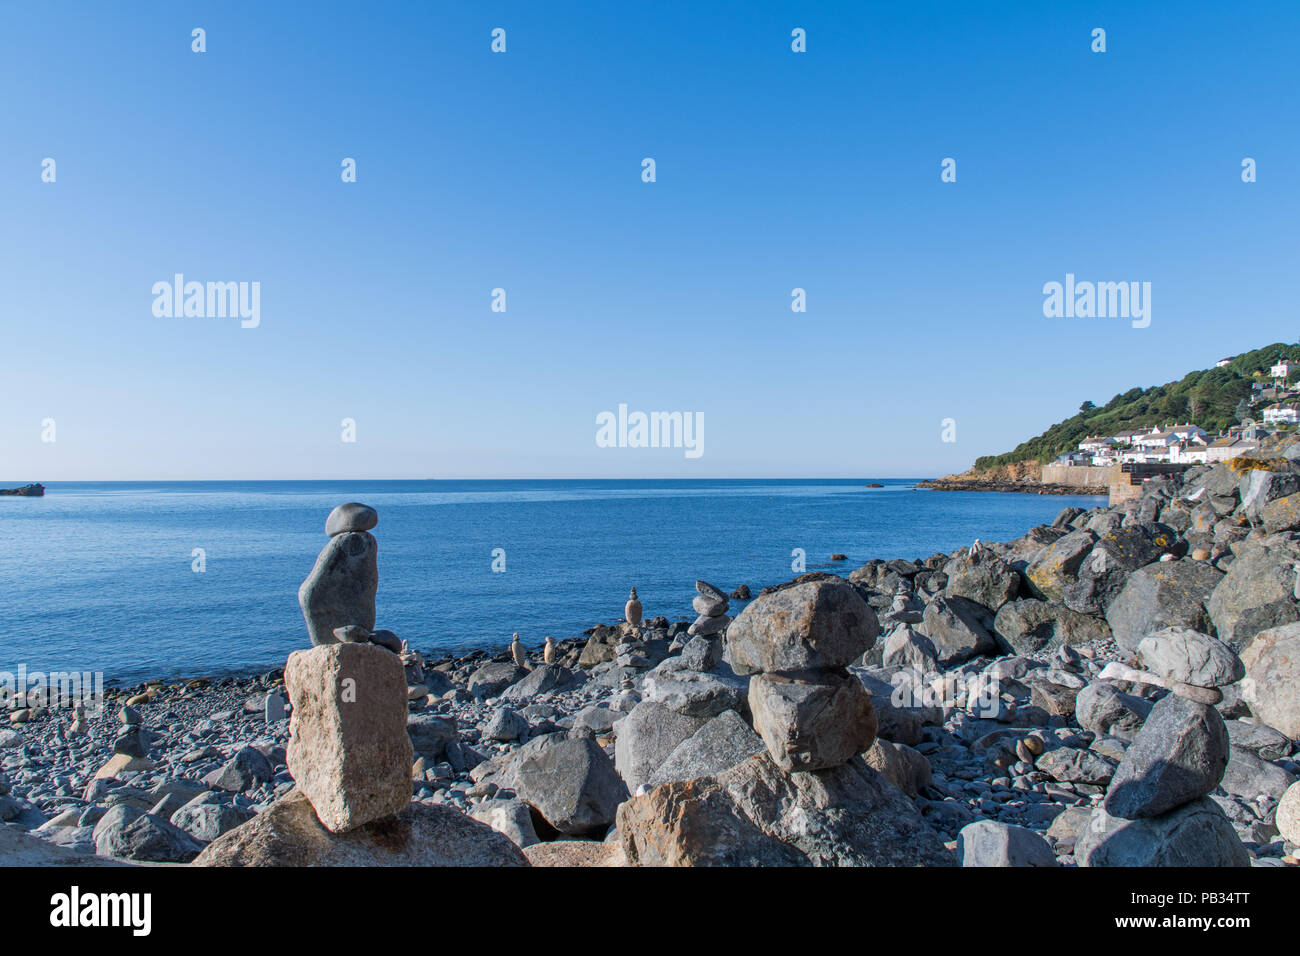 Mousehole, Cornwall, UK. 26th July 2018. UK Weather. Locals awoke to find the rocky beach at Mousehole had been 'fairy stacked' with the stones precariously balanced on top of each other. Credit: Simon Maycock/Alamy Live News Stock Photo